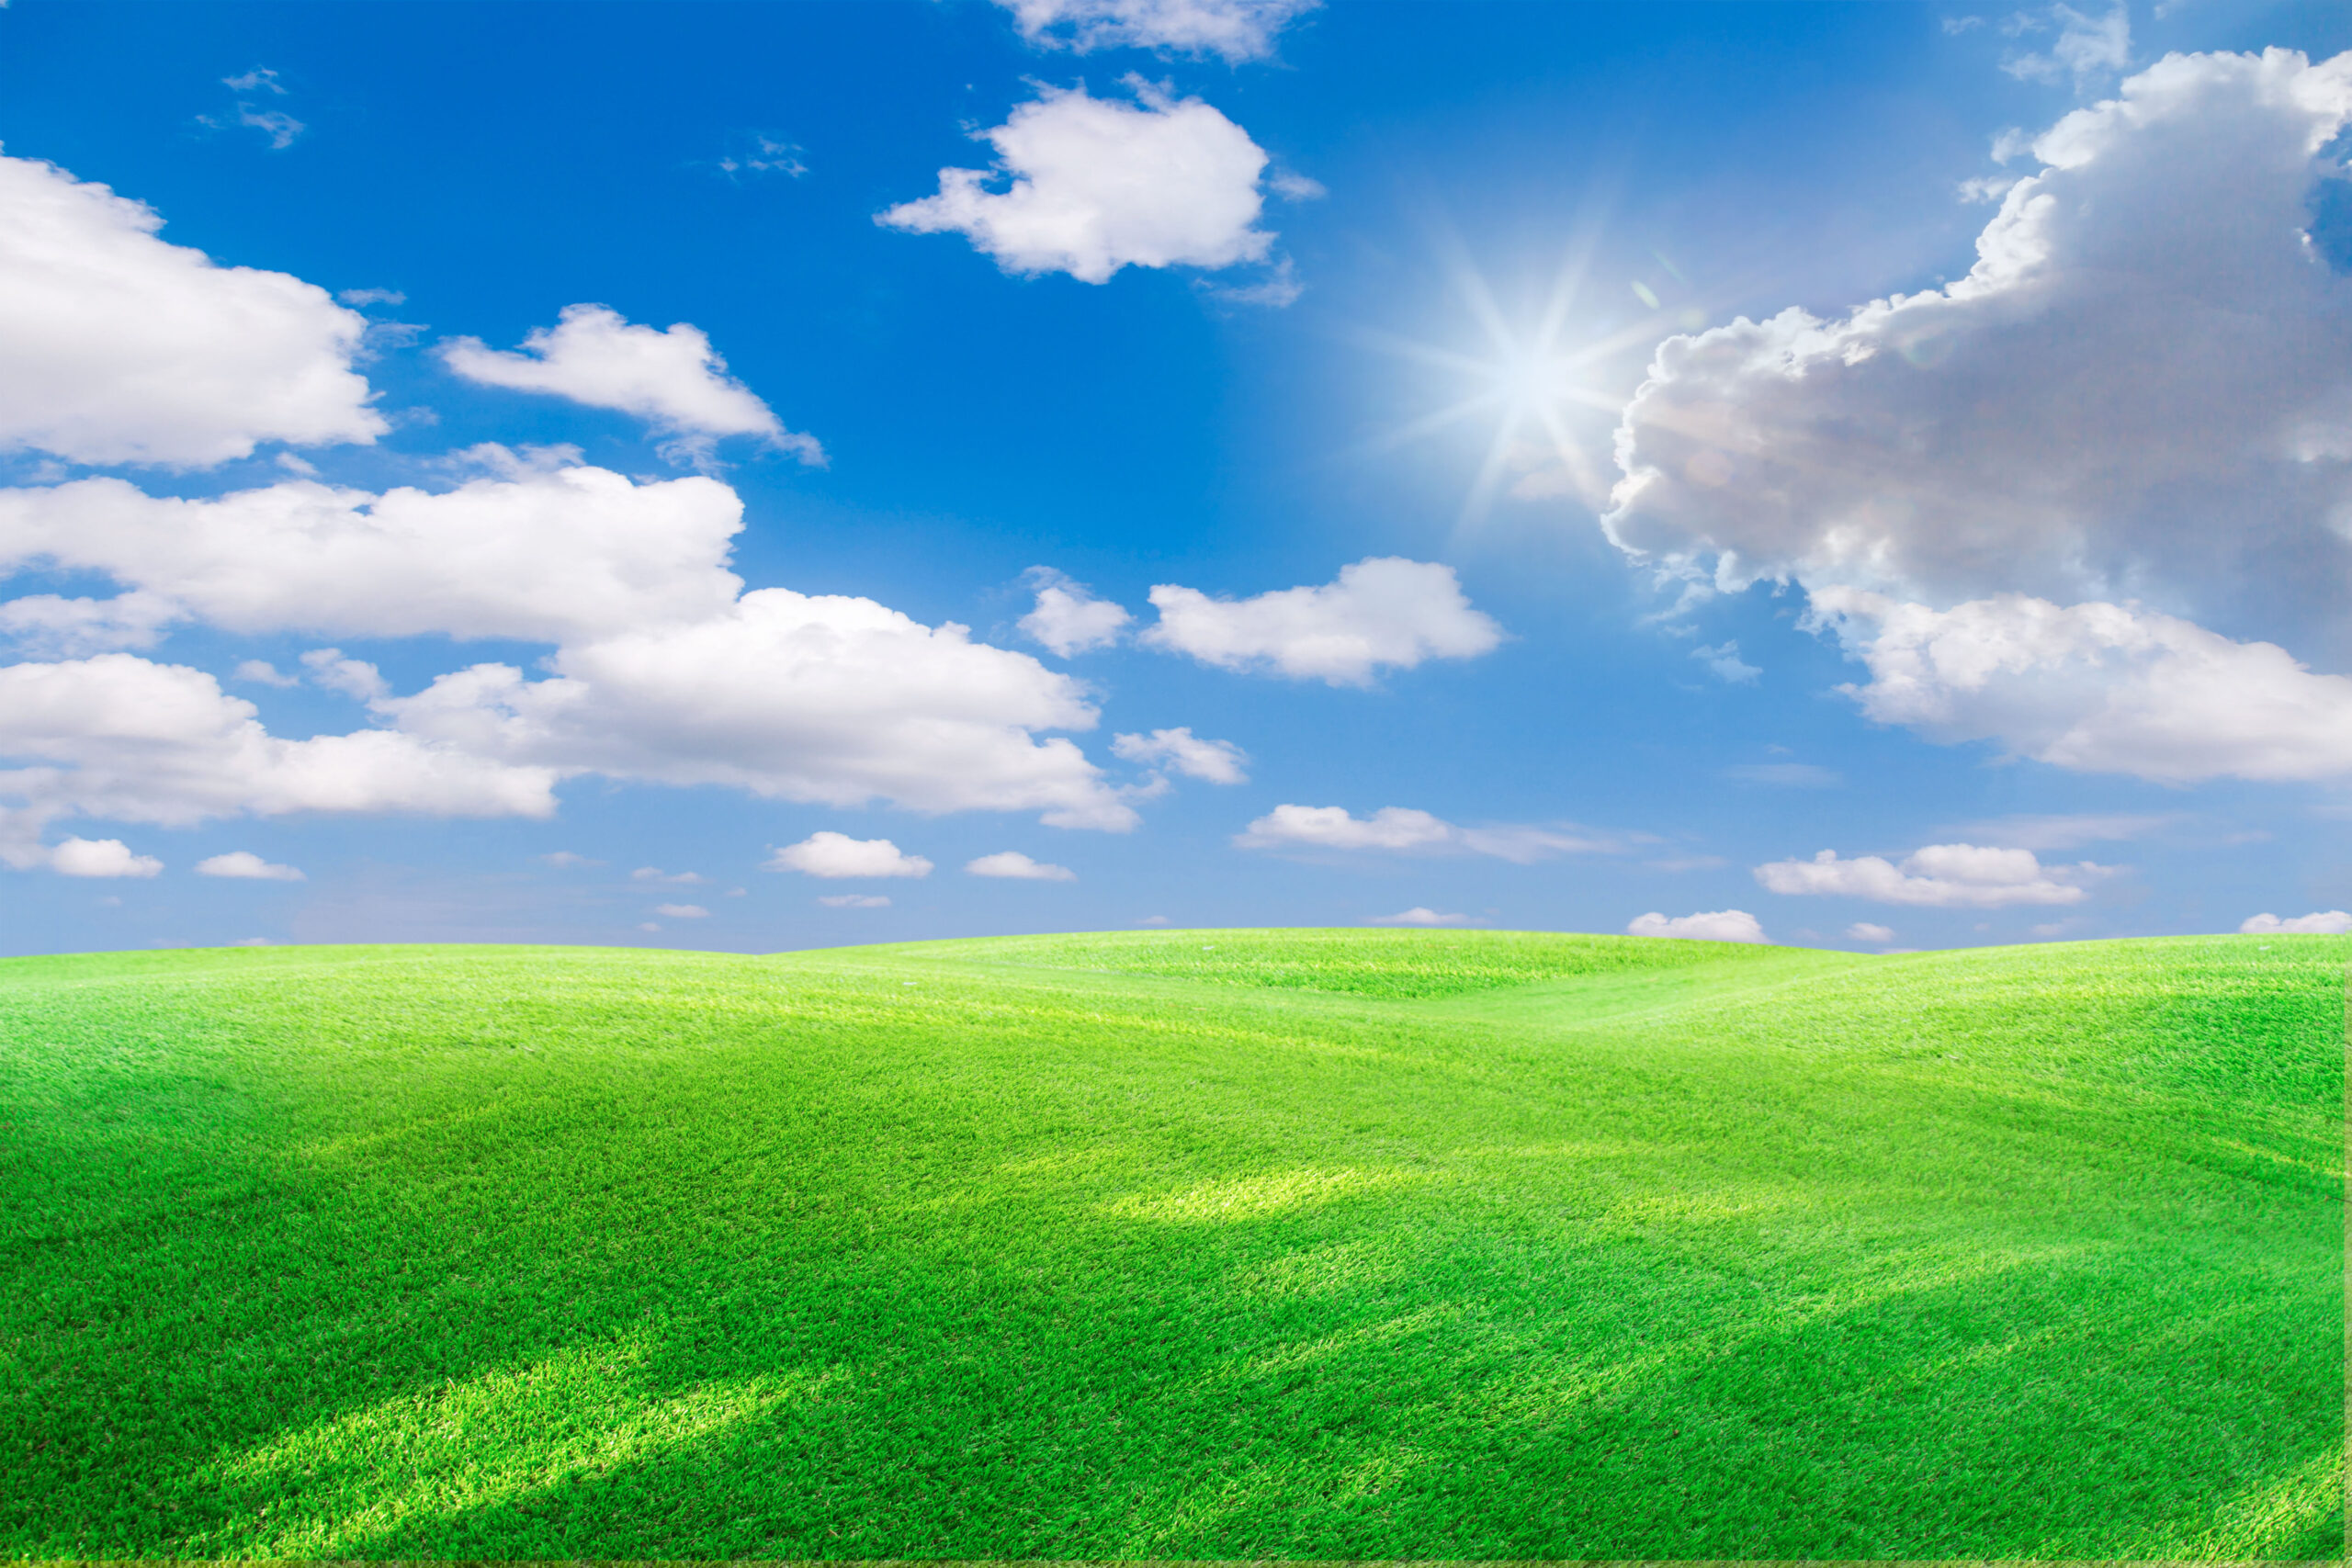 Blue sky with a green field